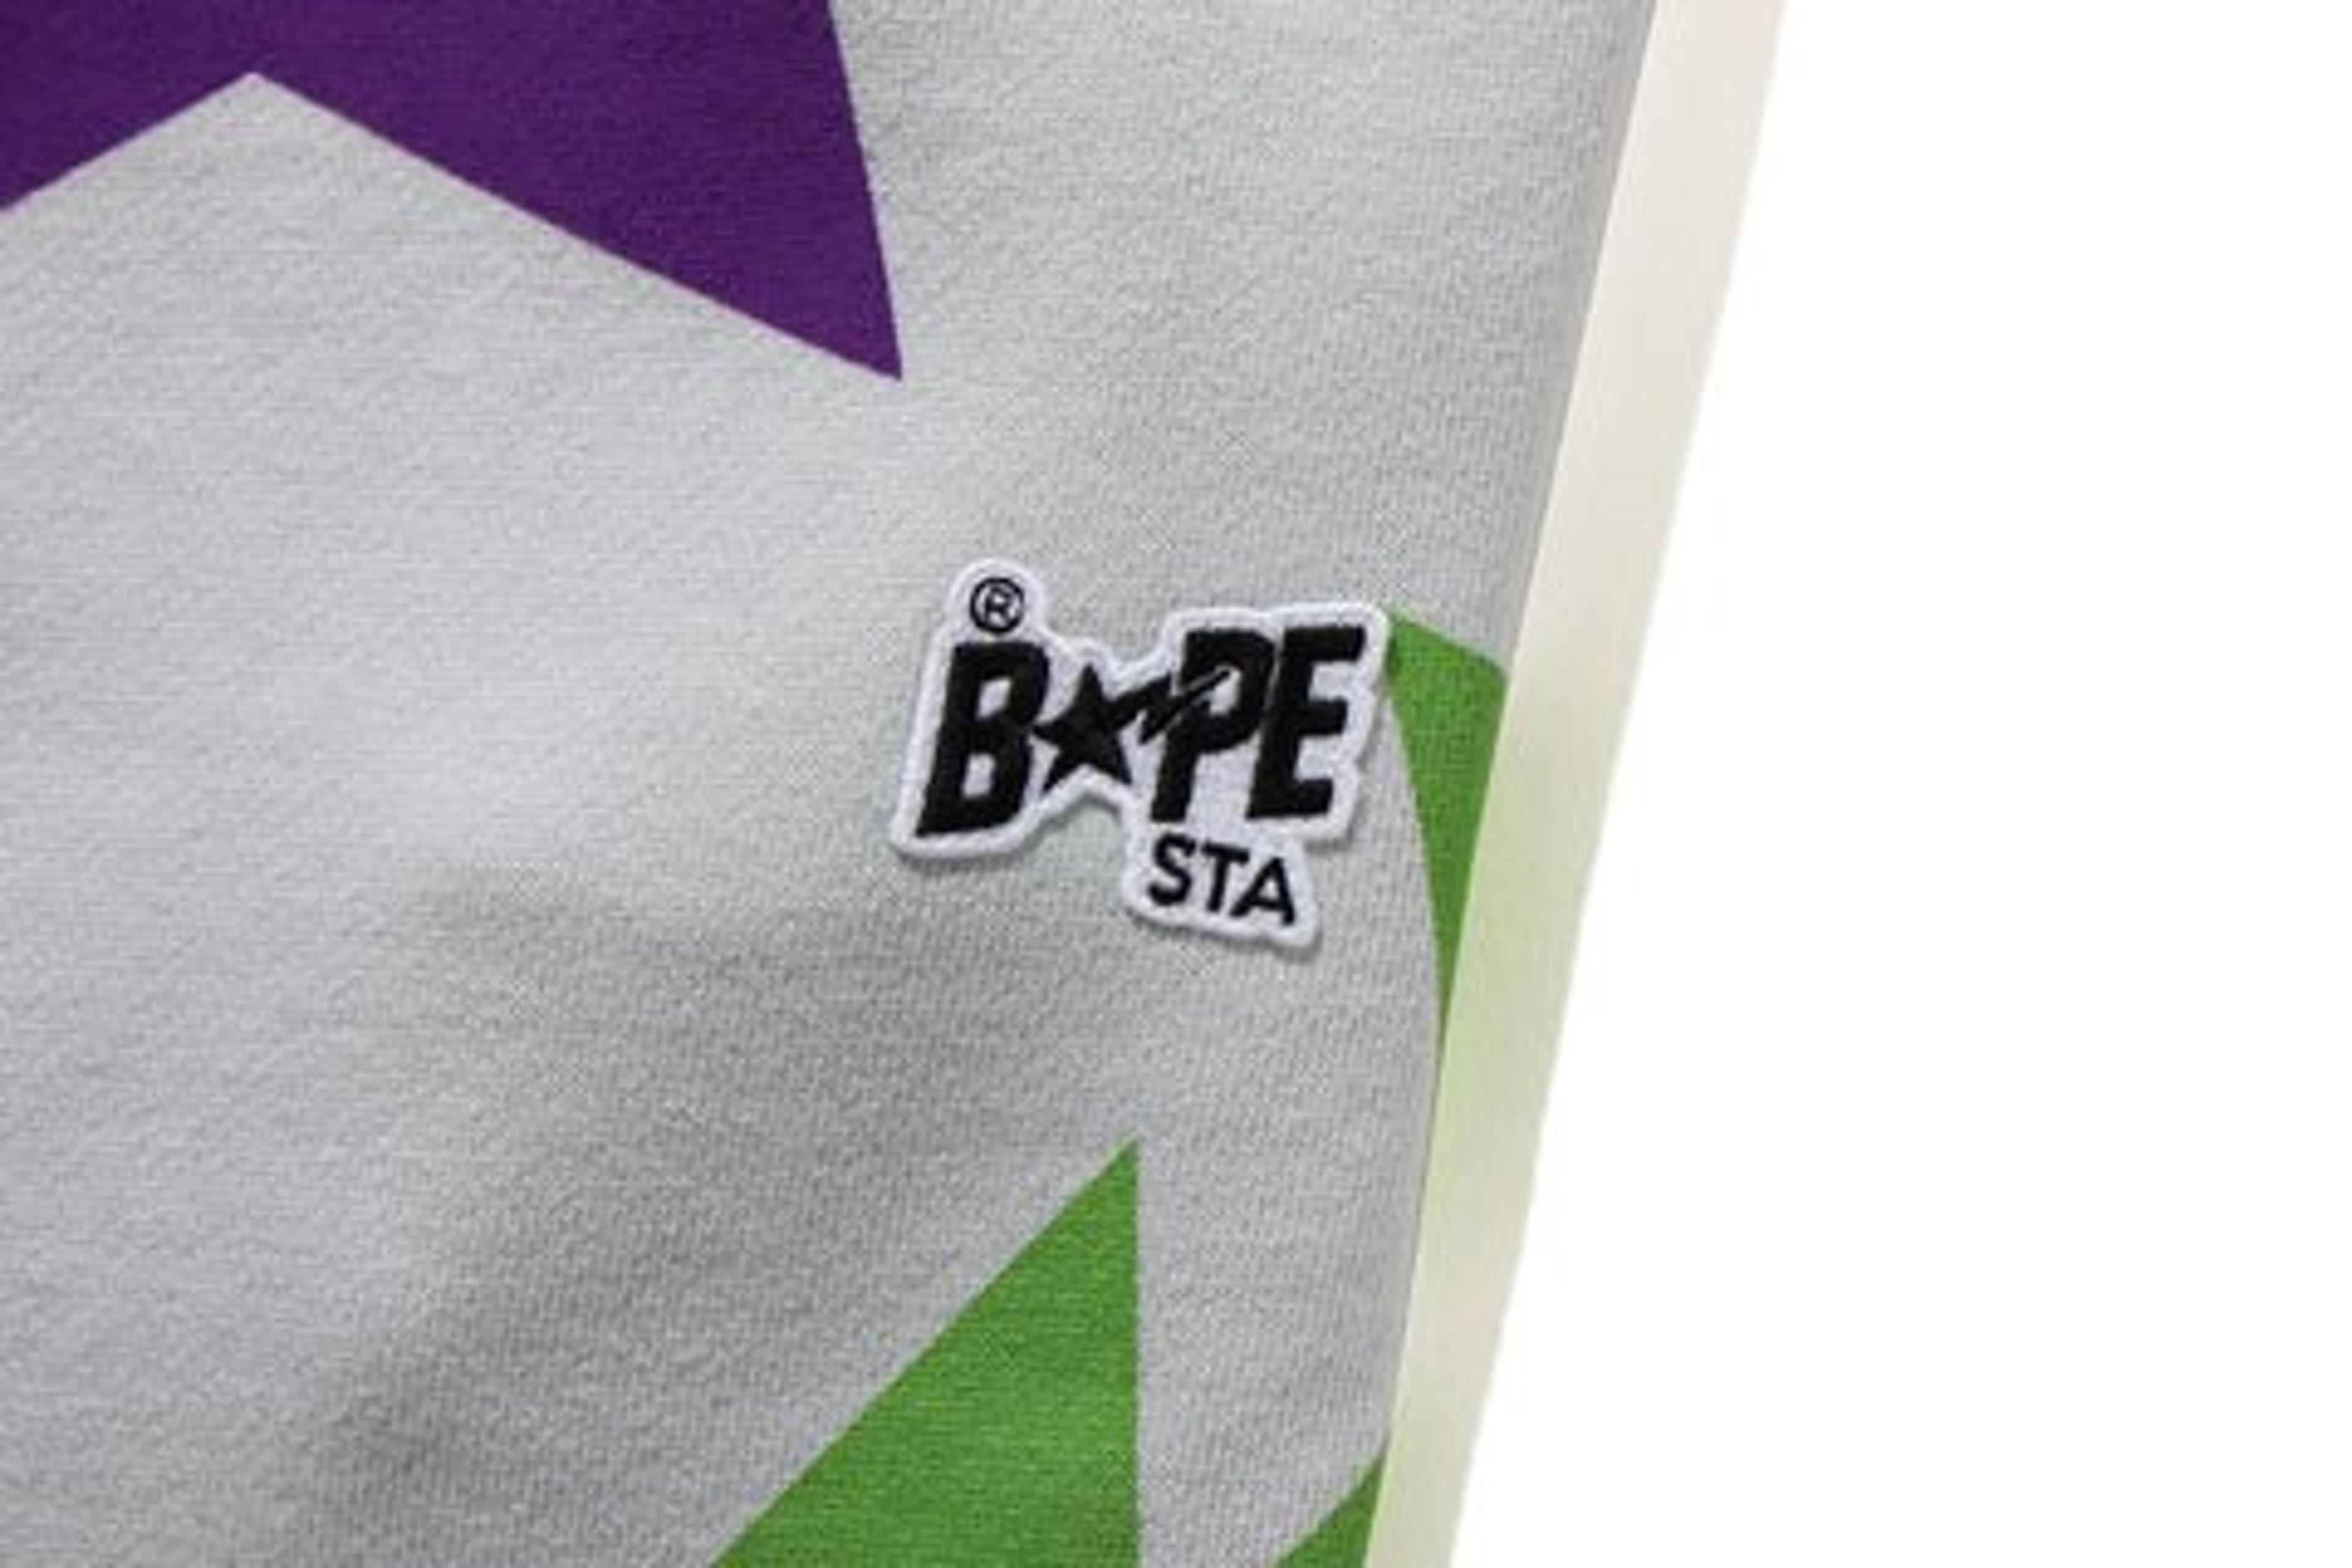 Alternate View 2 of Bape Sta Pattern Wide Fit Sweat Shorts Multicolor